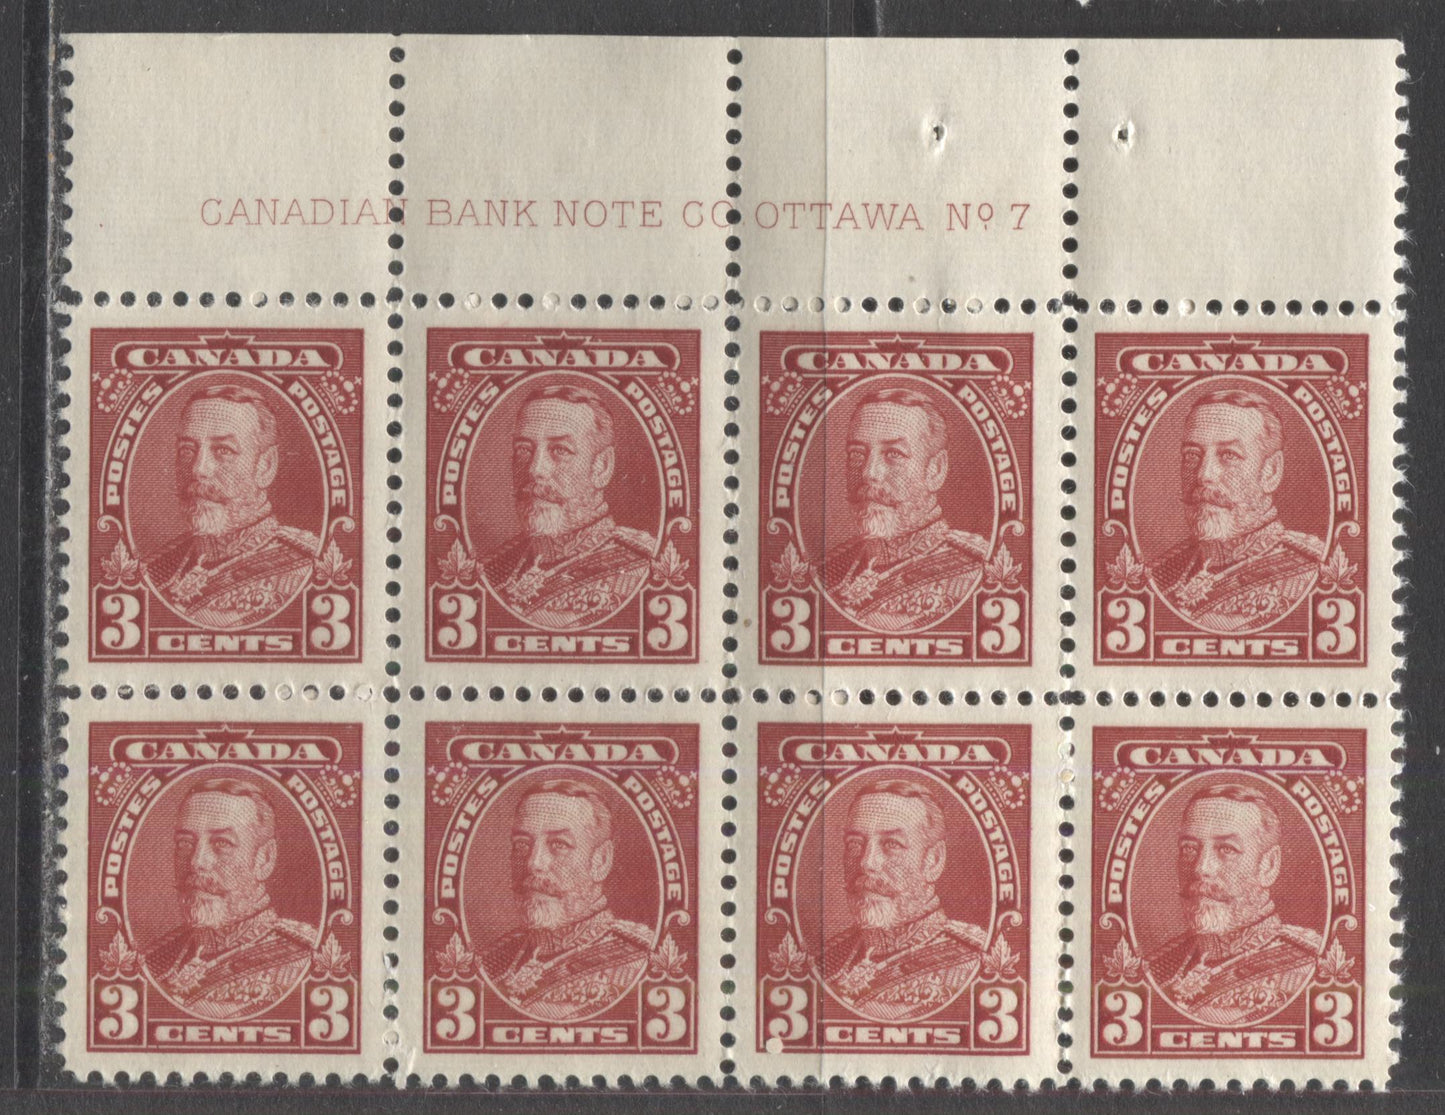 Lot 286 Canada #219 3c Dark Carmine King George V, 1935 Pictorial Issue, A VFNH Plate 7 Upper Centre Block Of 8 On Horizontal Ribbed Paper With Deep Yellowish Cream Gum